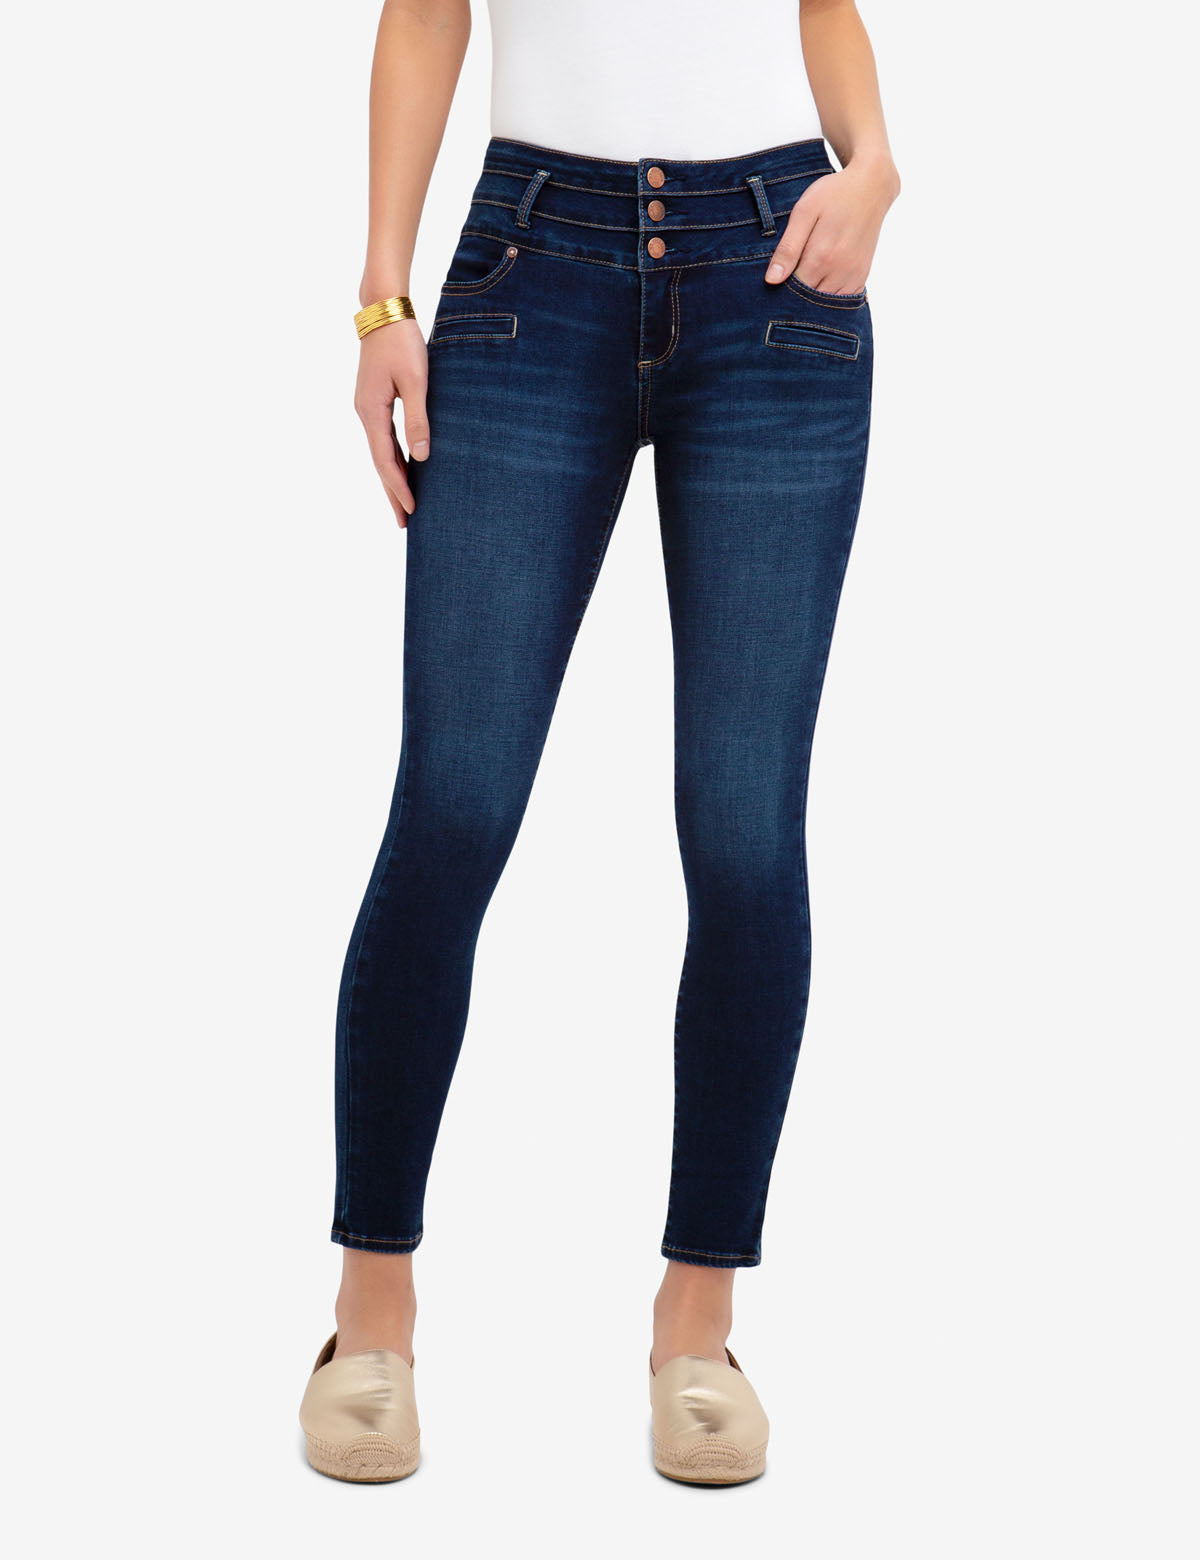 polo jeans womens